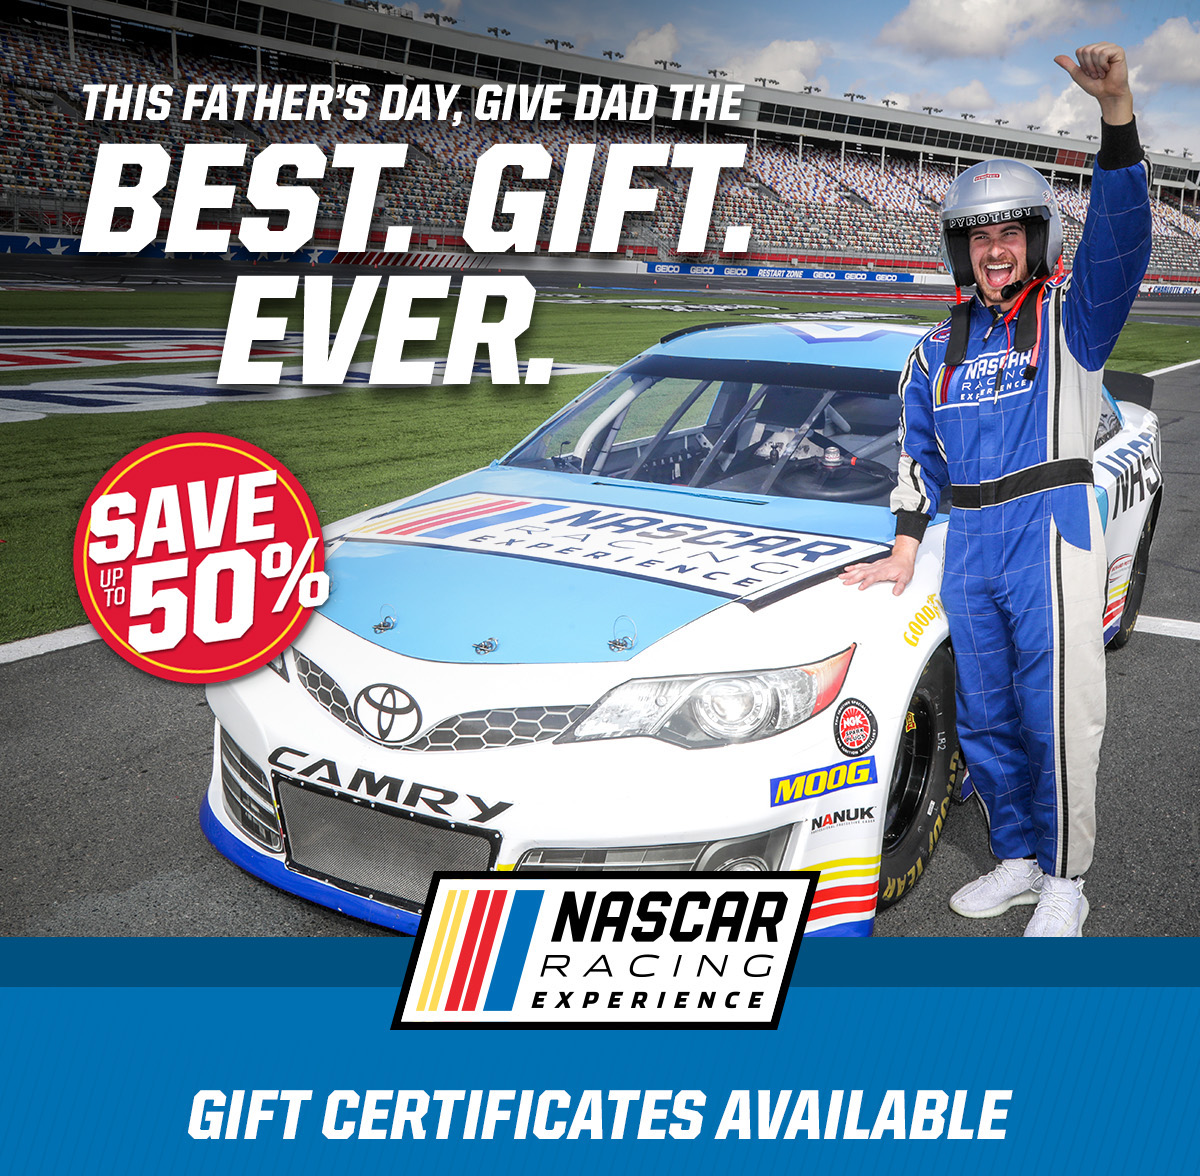 Richard Petty Driving Experience Talladega Superspeedway gift